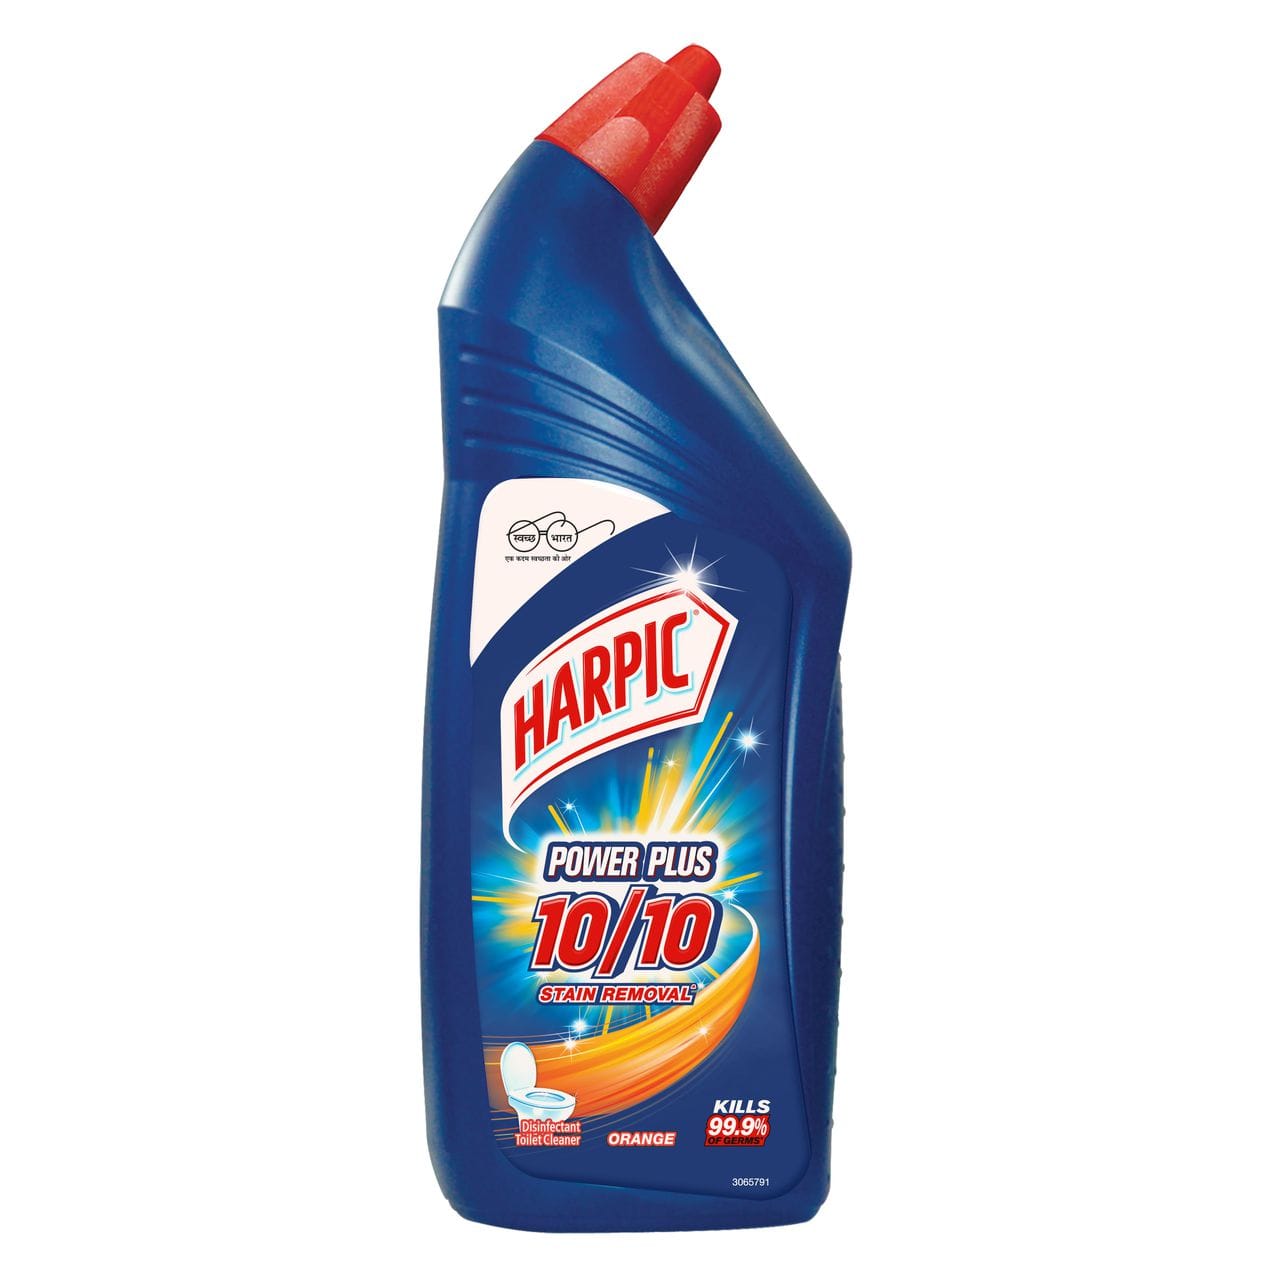 Harpic Power Plus Toilet Cleaner Household Cleaning Products